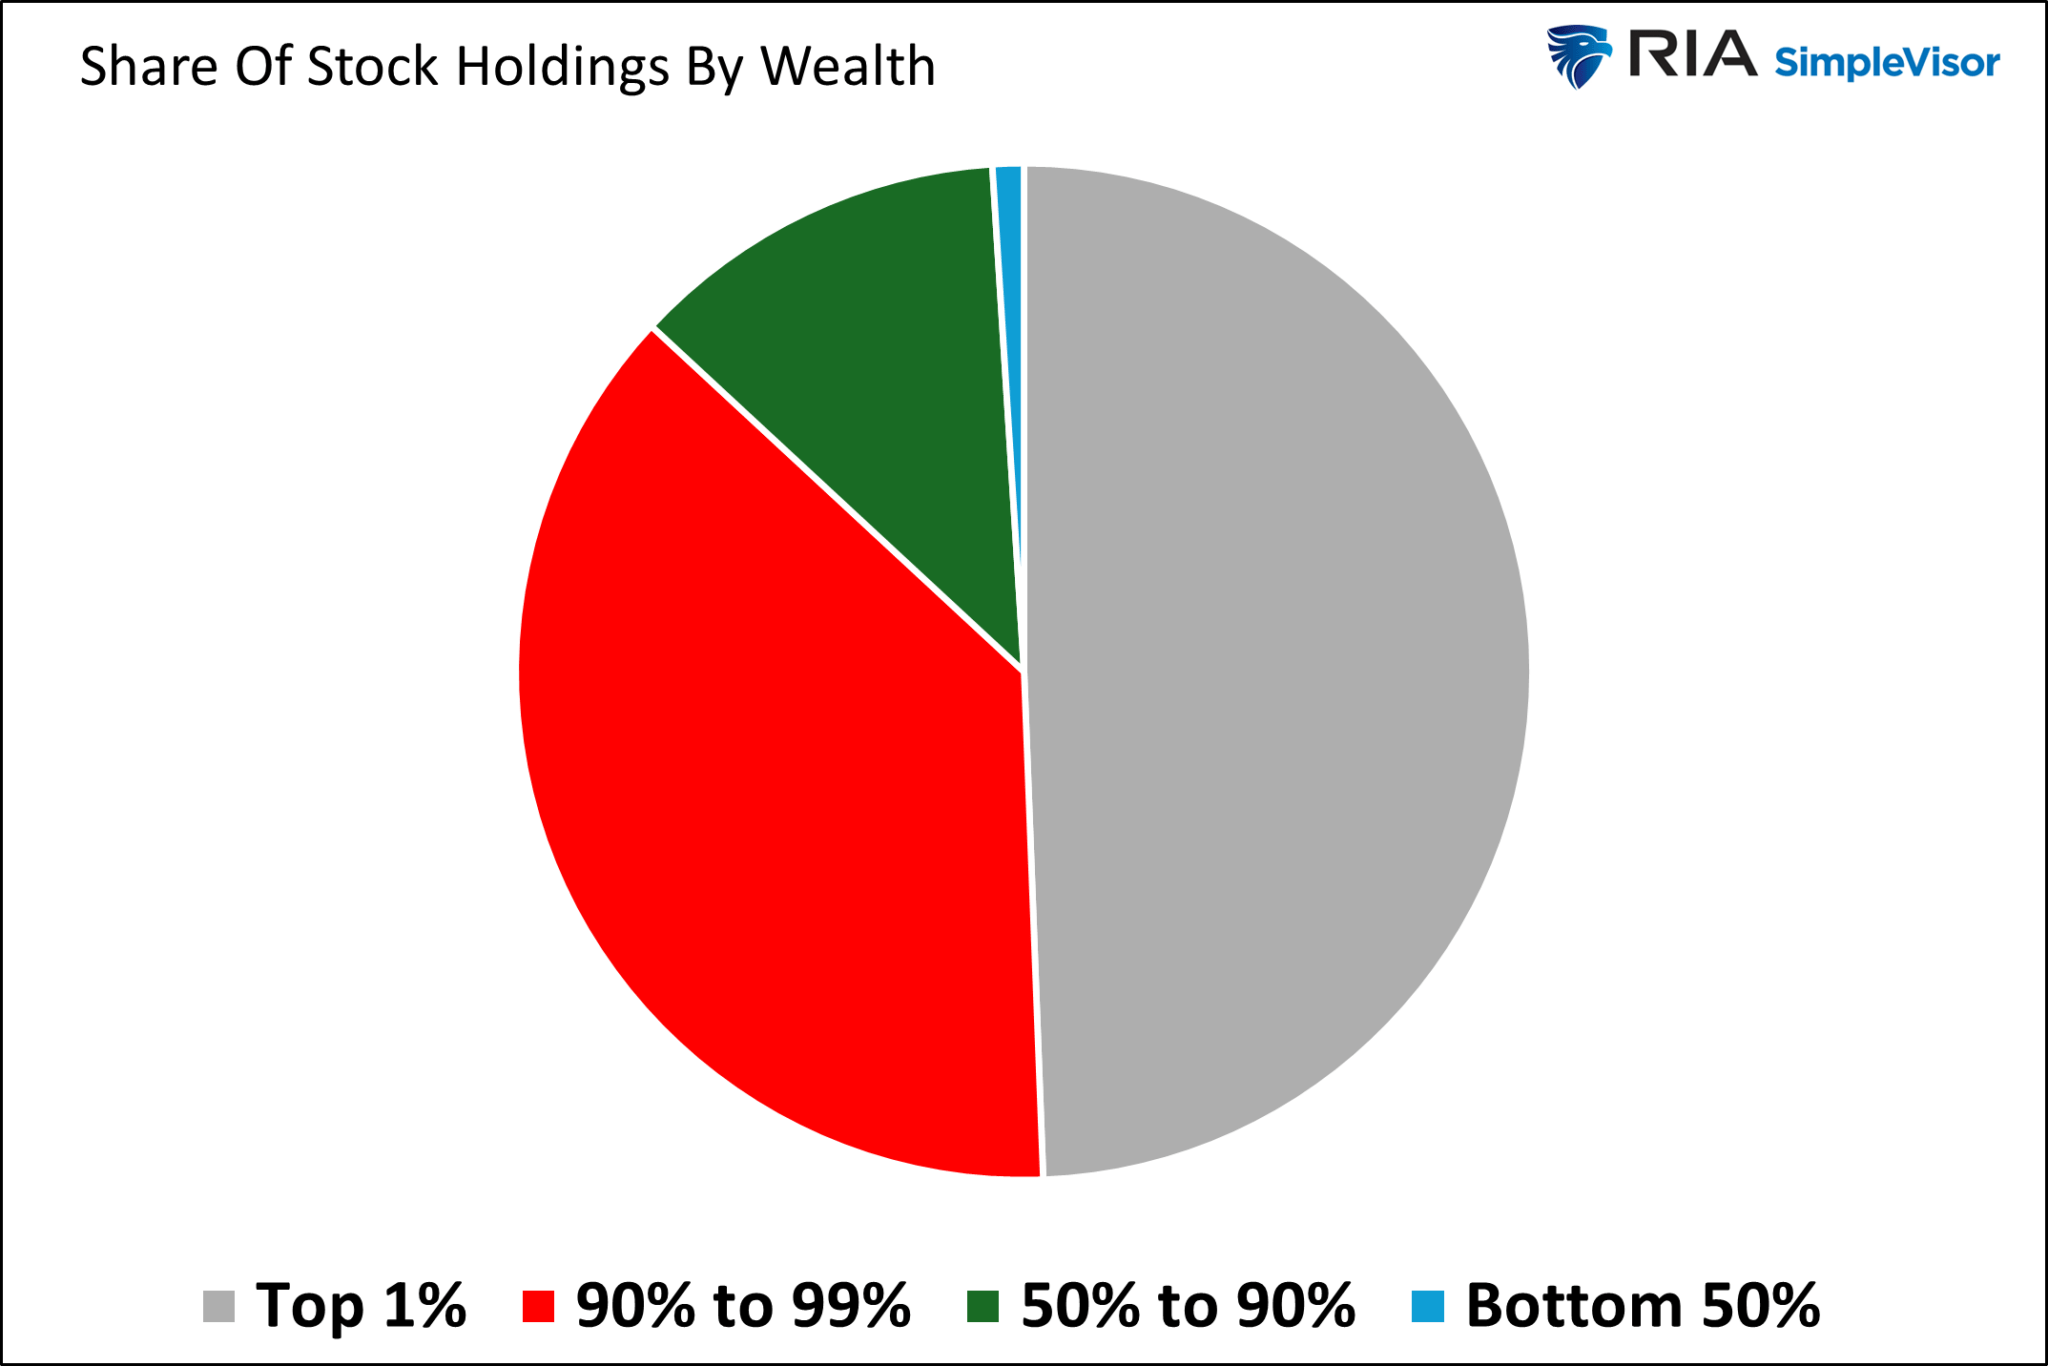 Share Of Stock Holdings By Wealth